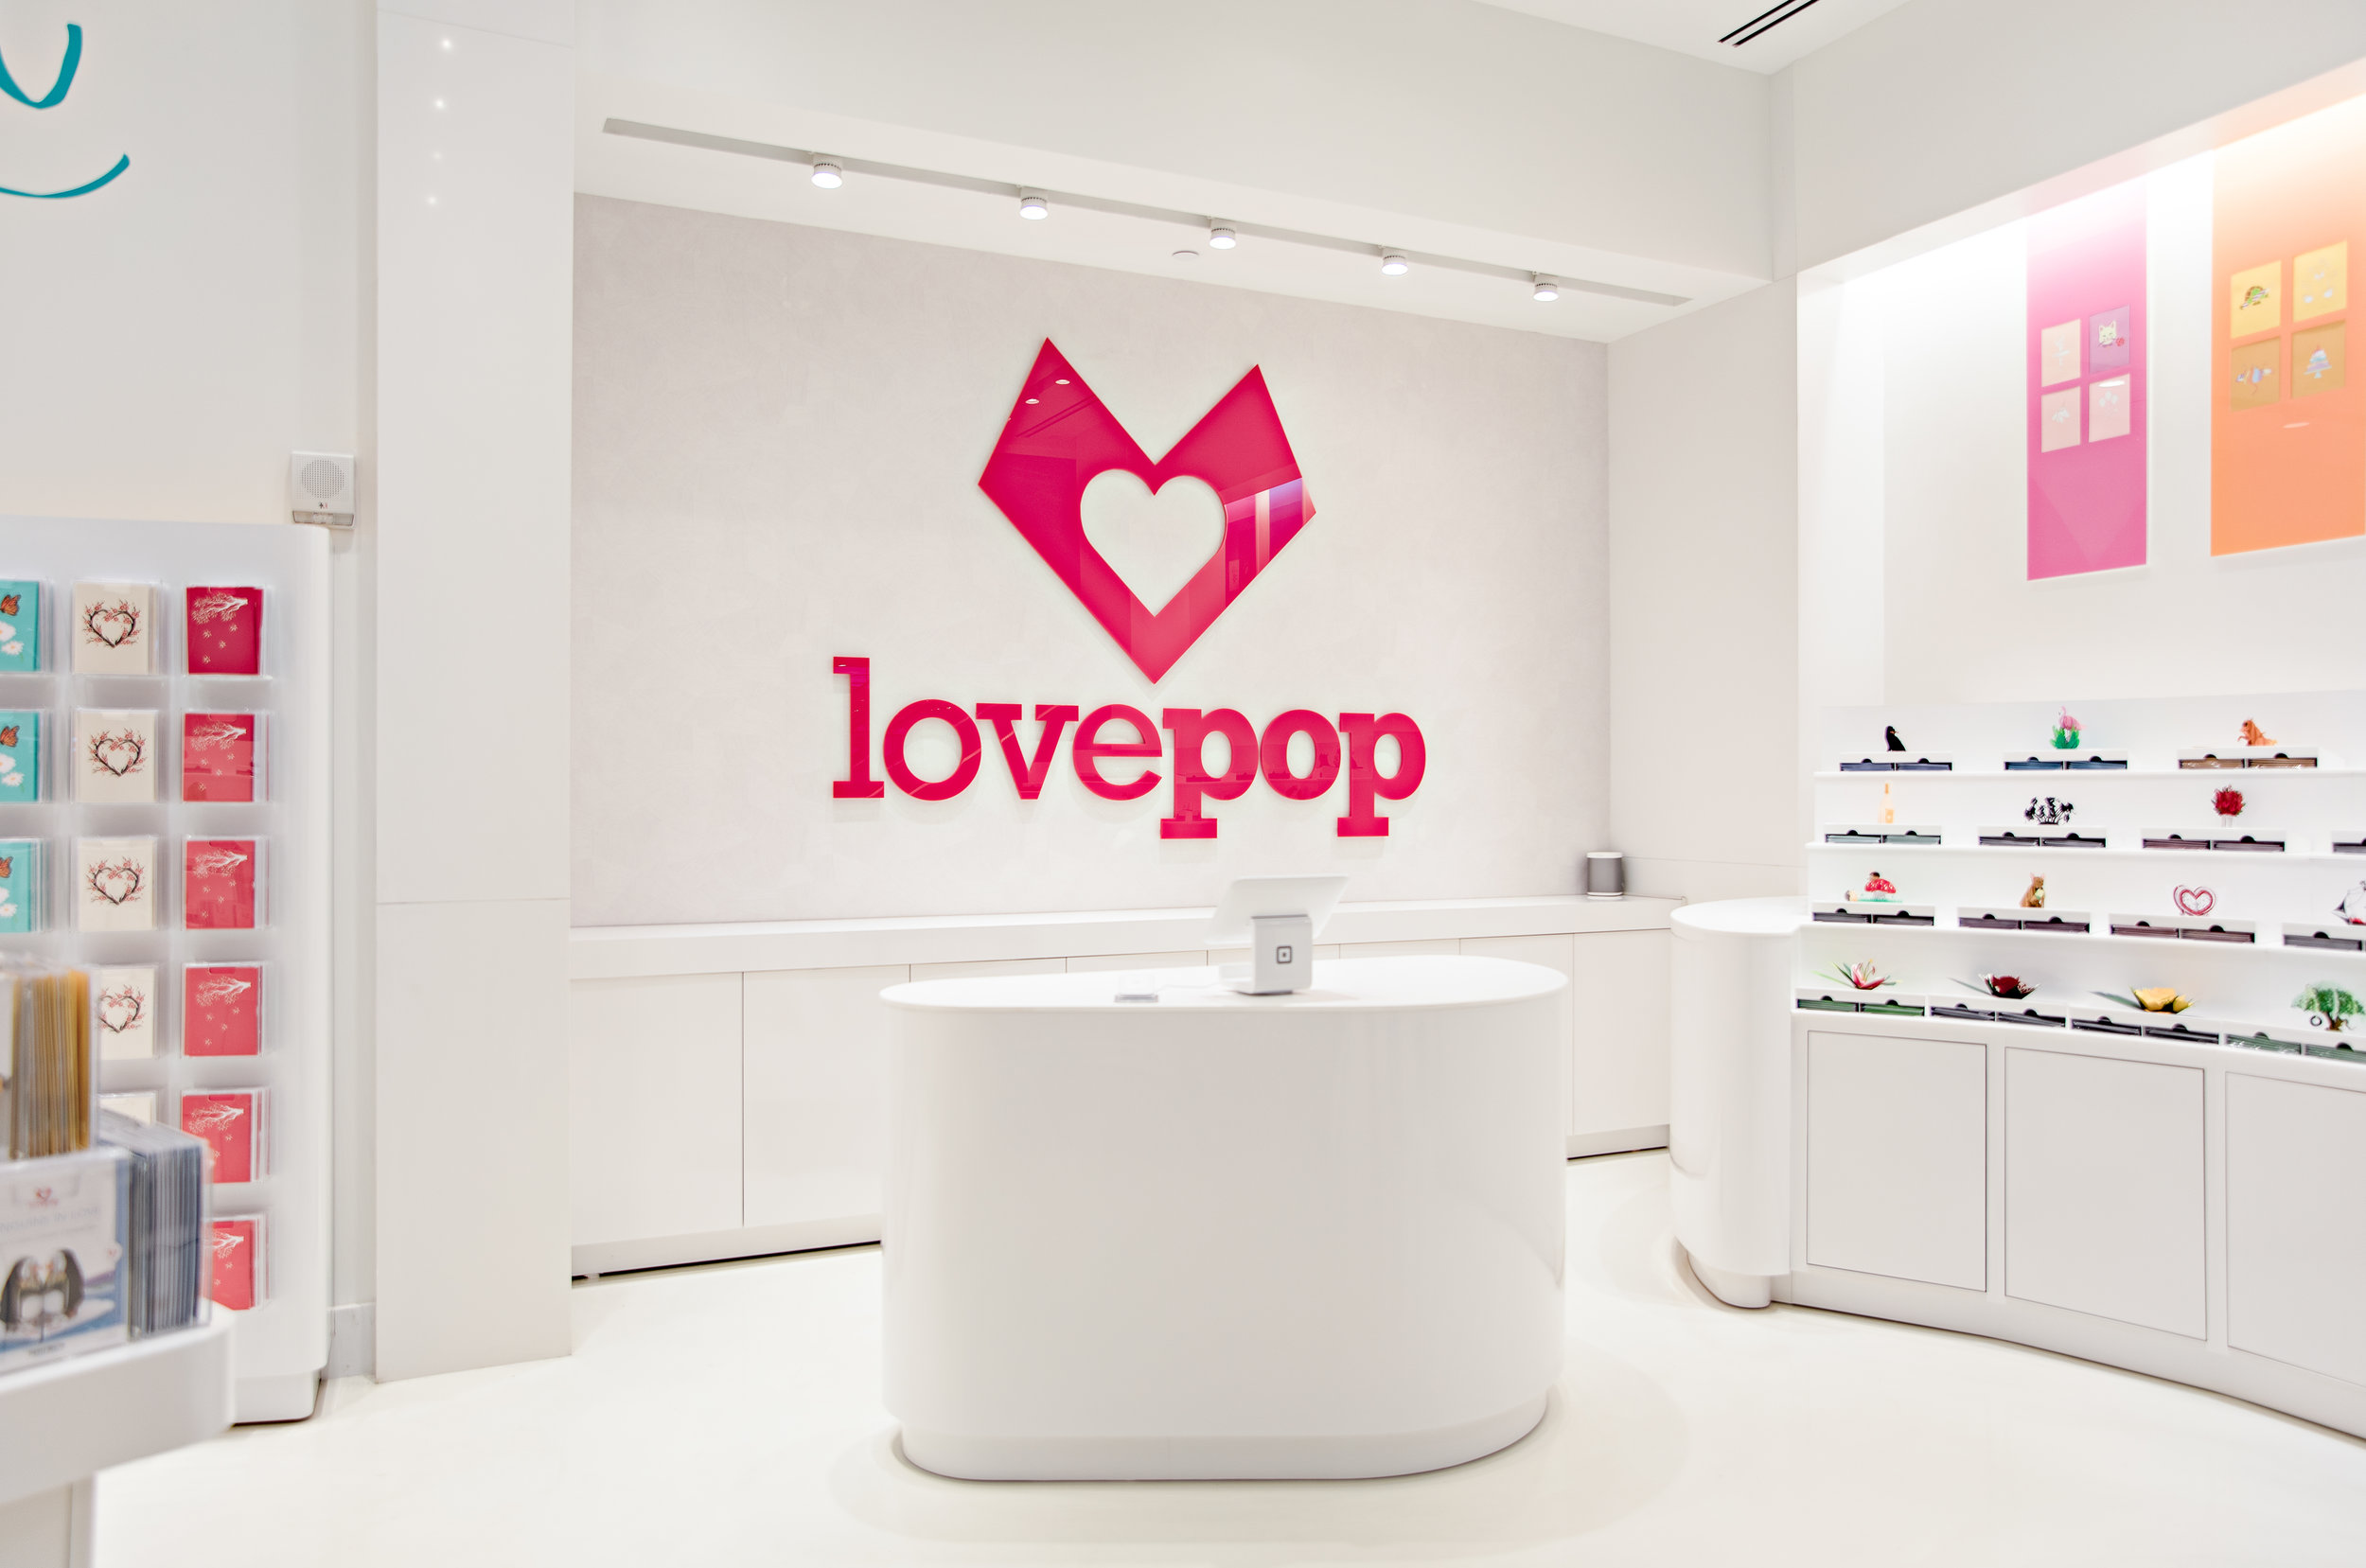 Lovepop Opens First Brick and Mortar Store